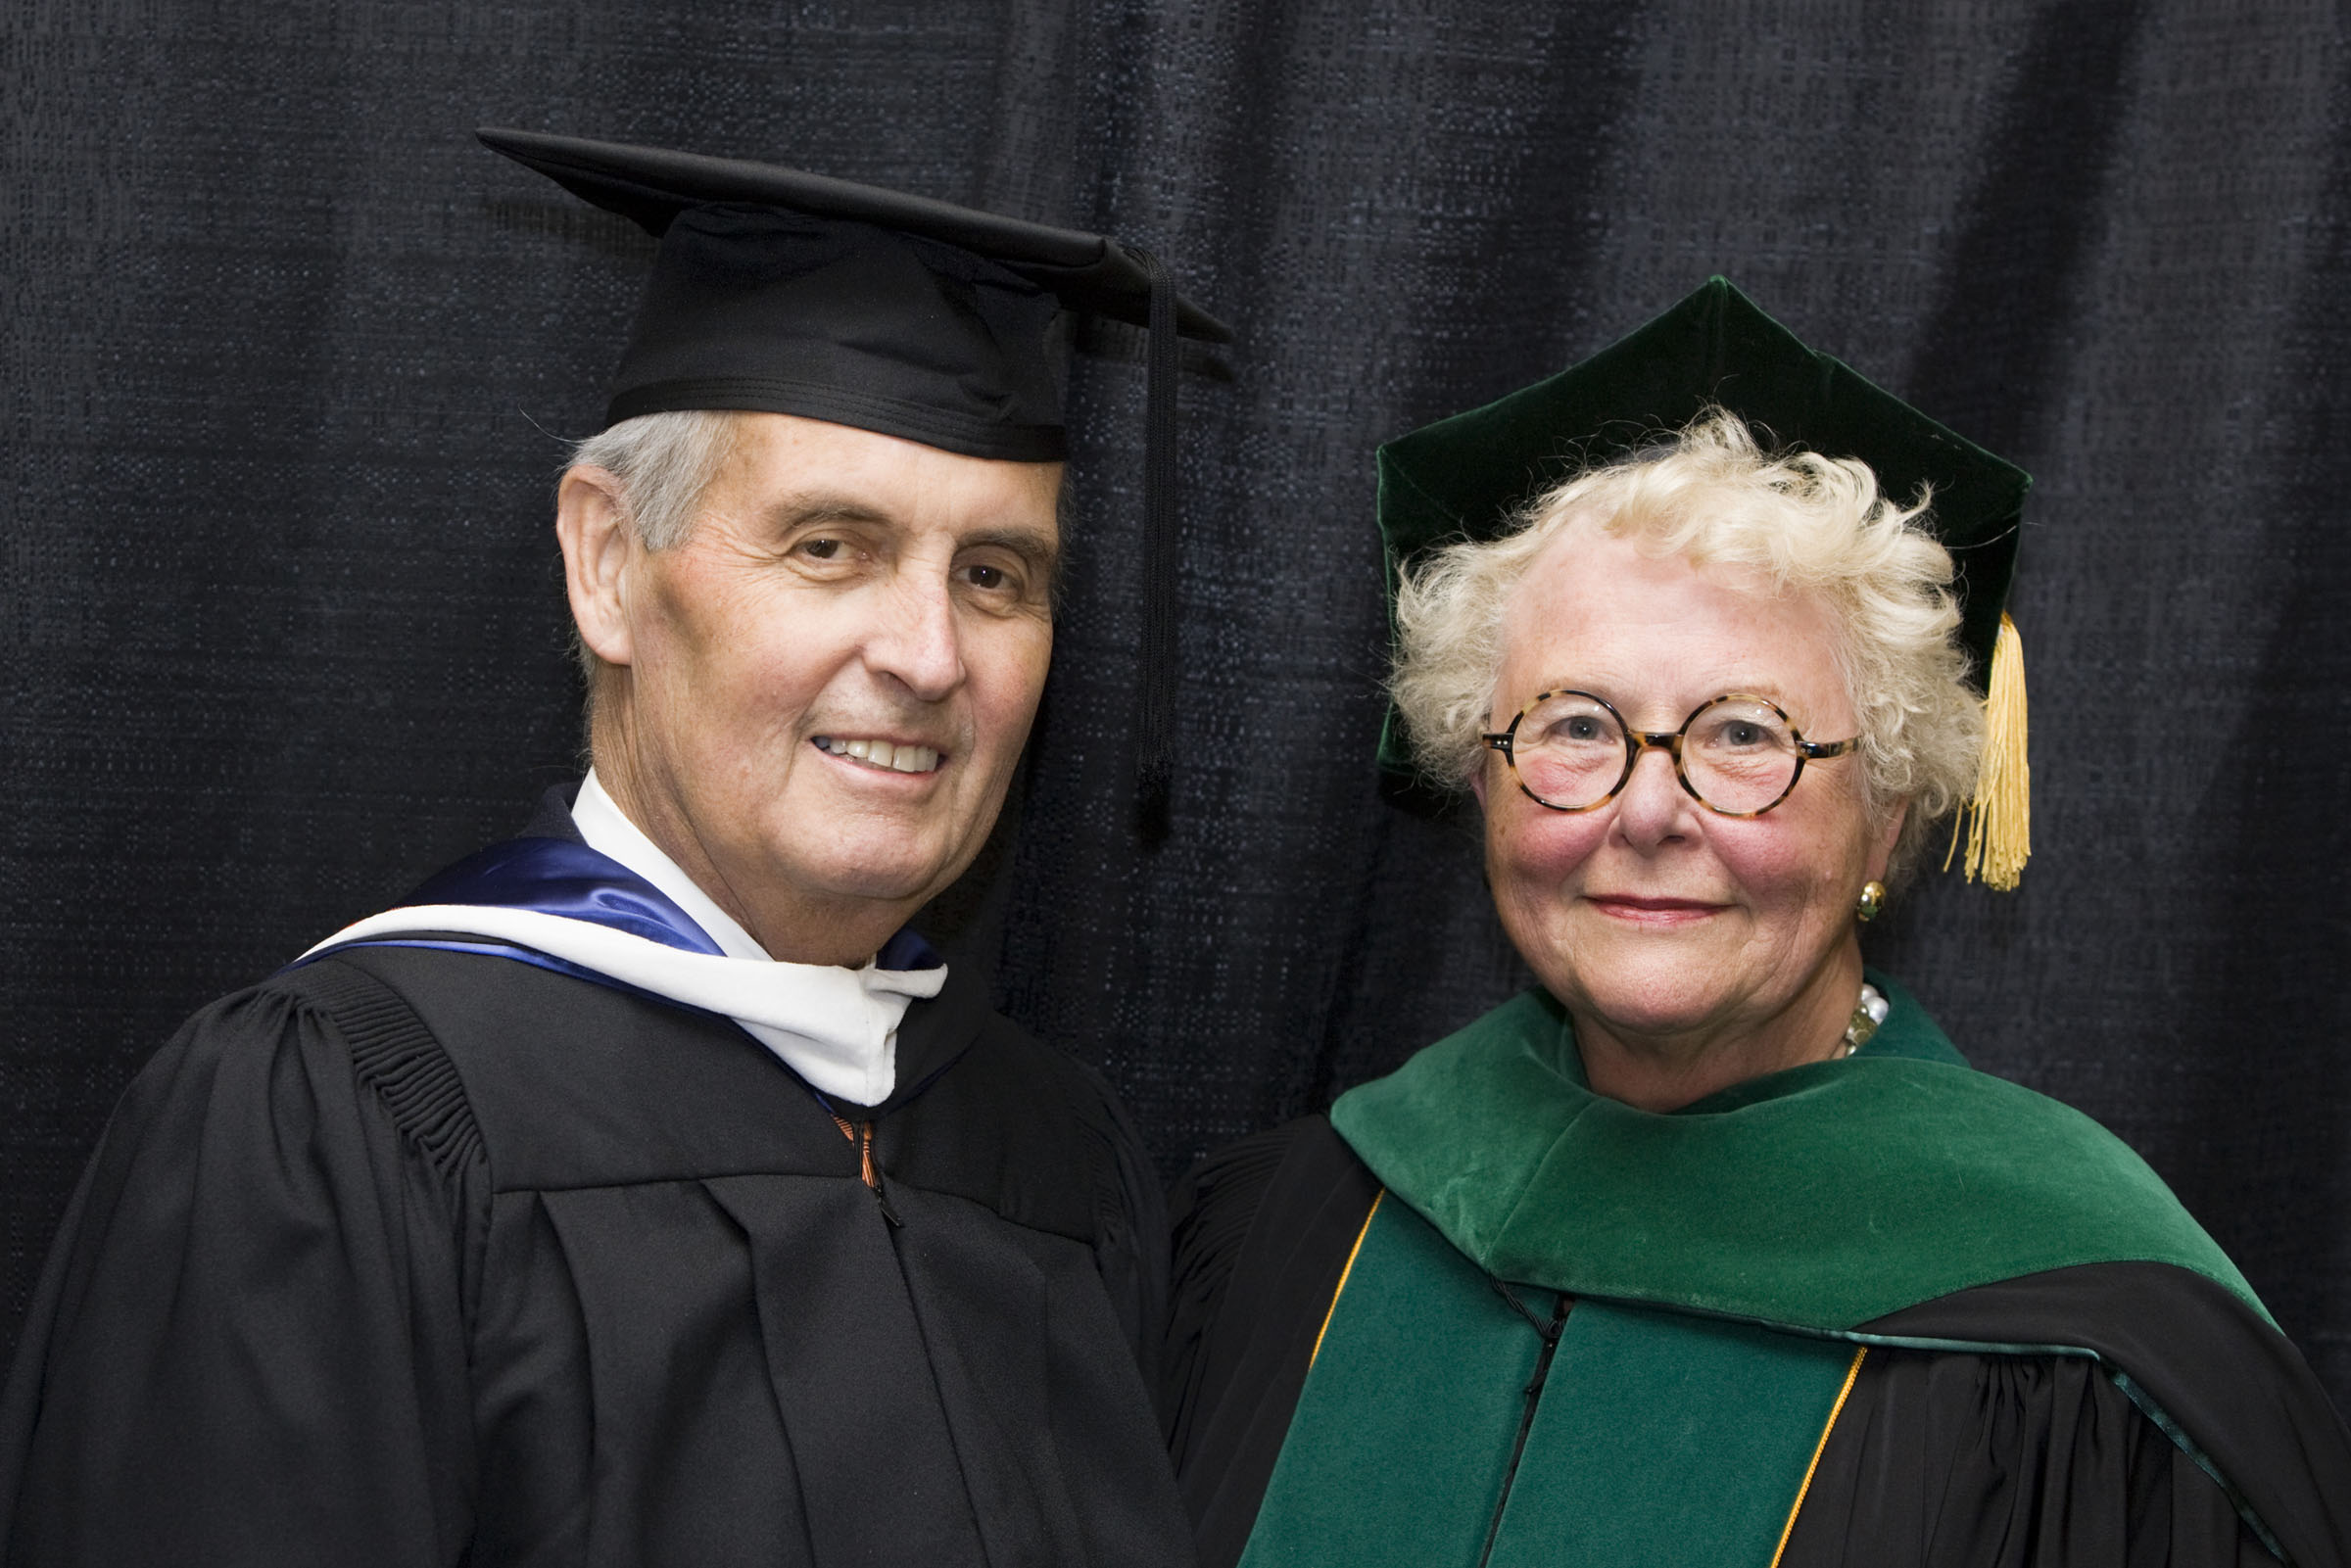 Jack Blackburn and Dr. Sharon Hostler stand next to each other dressed in caps and gowns smiling at the camera